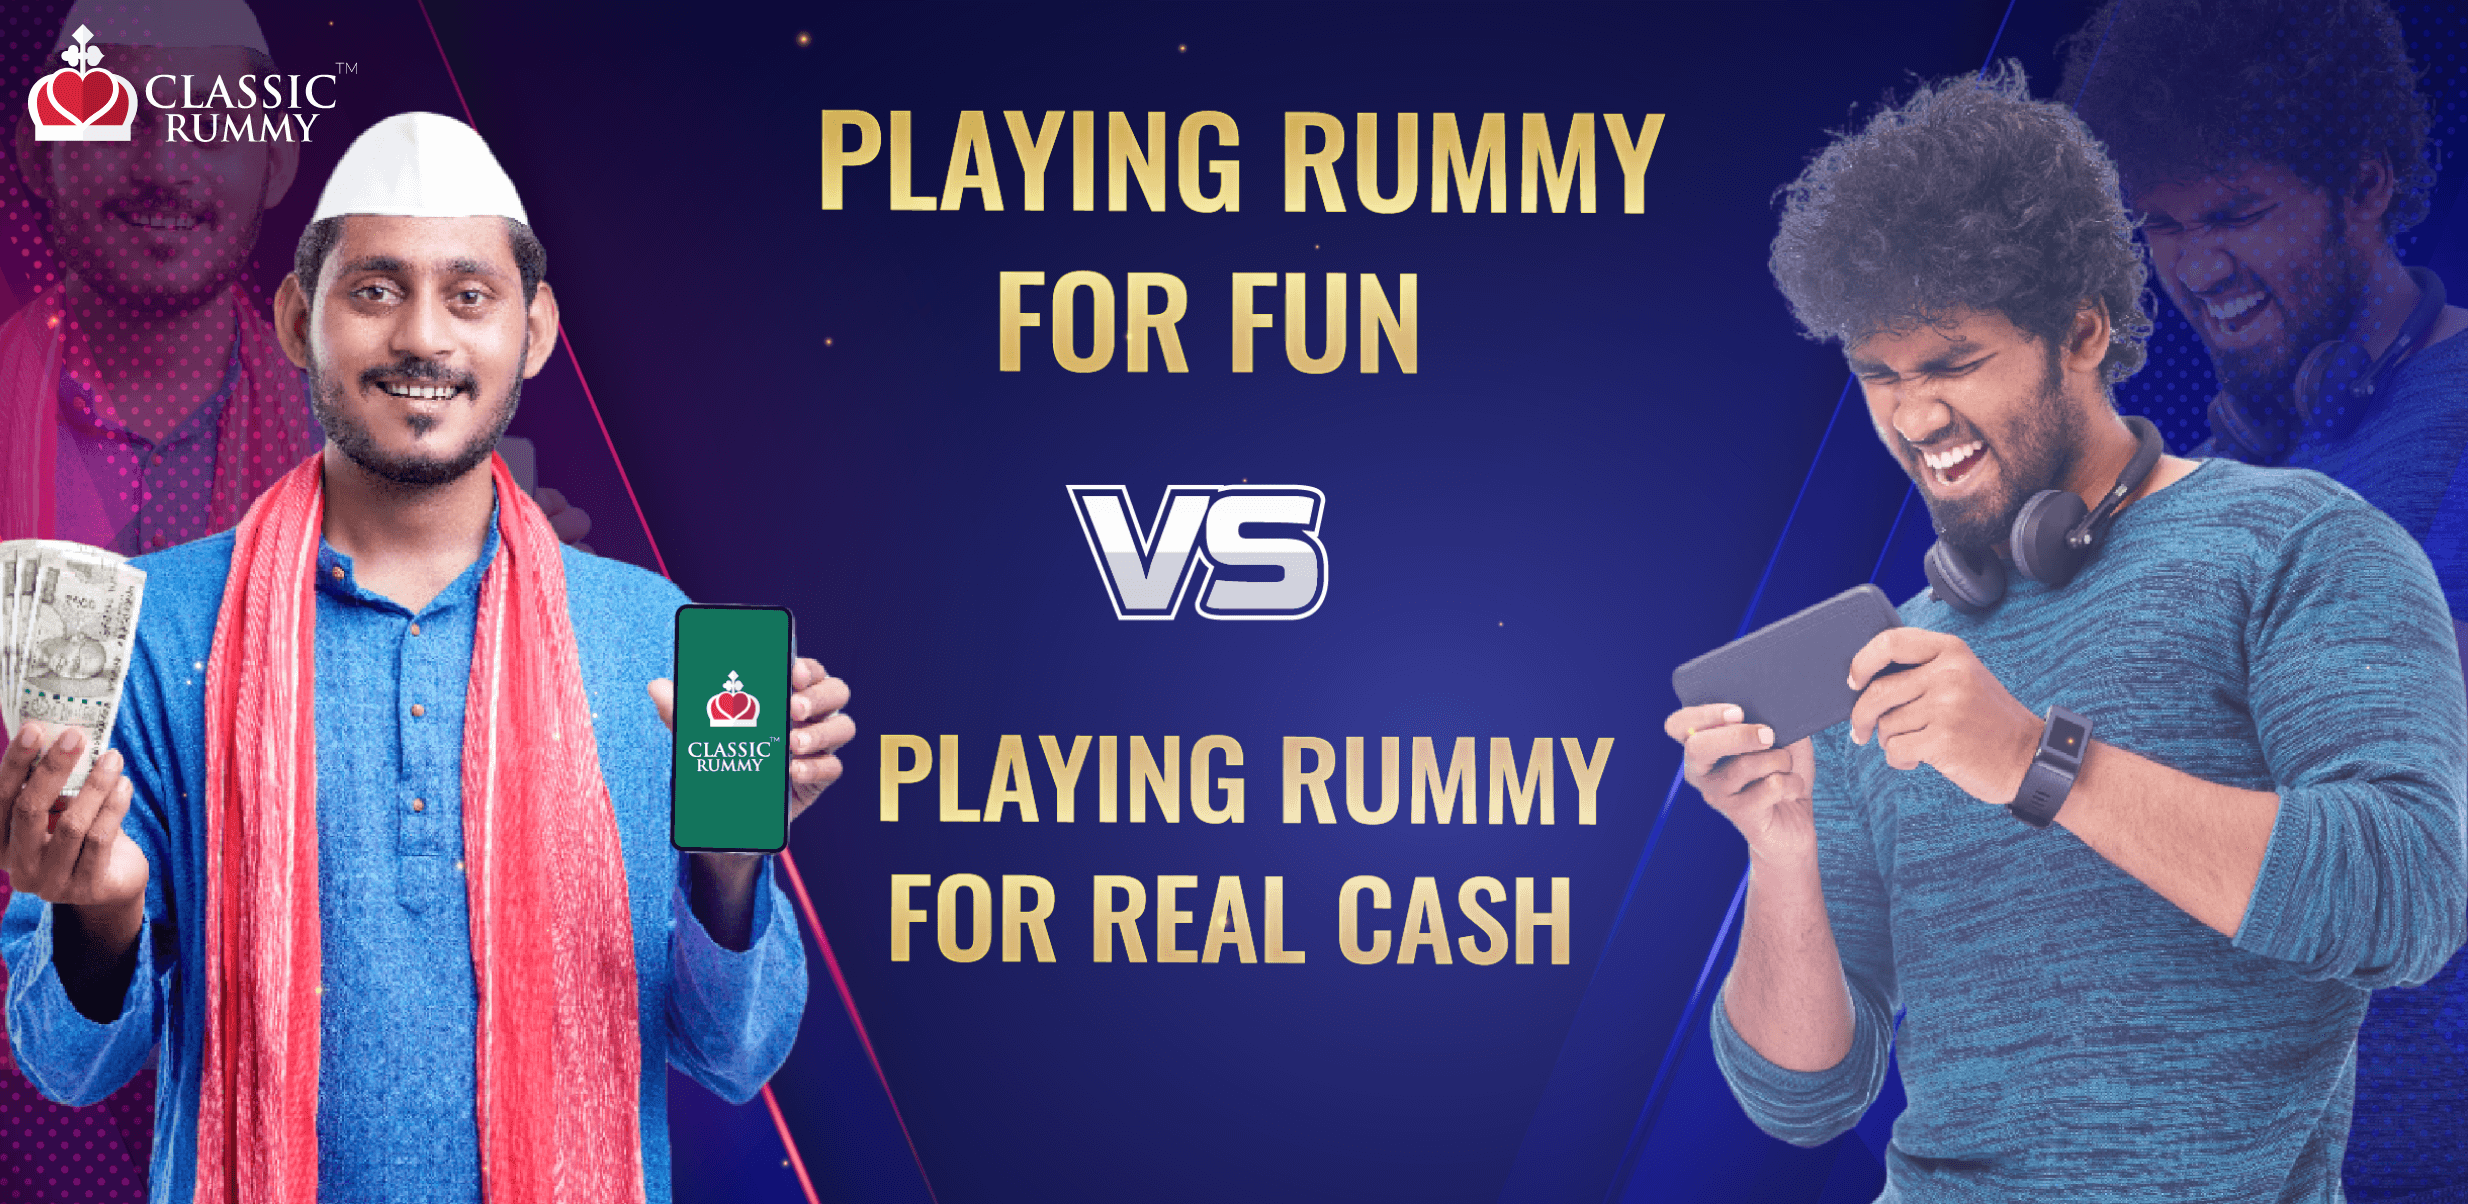 Playing Rummy for Fun vs Playing Rummy for Real Cash